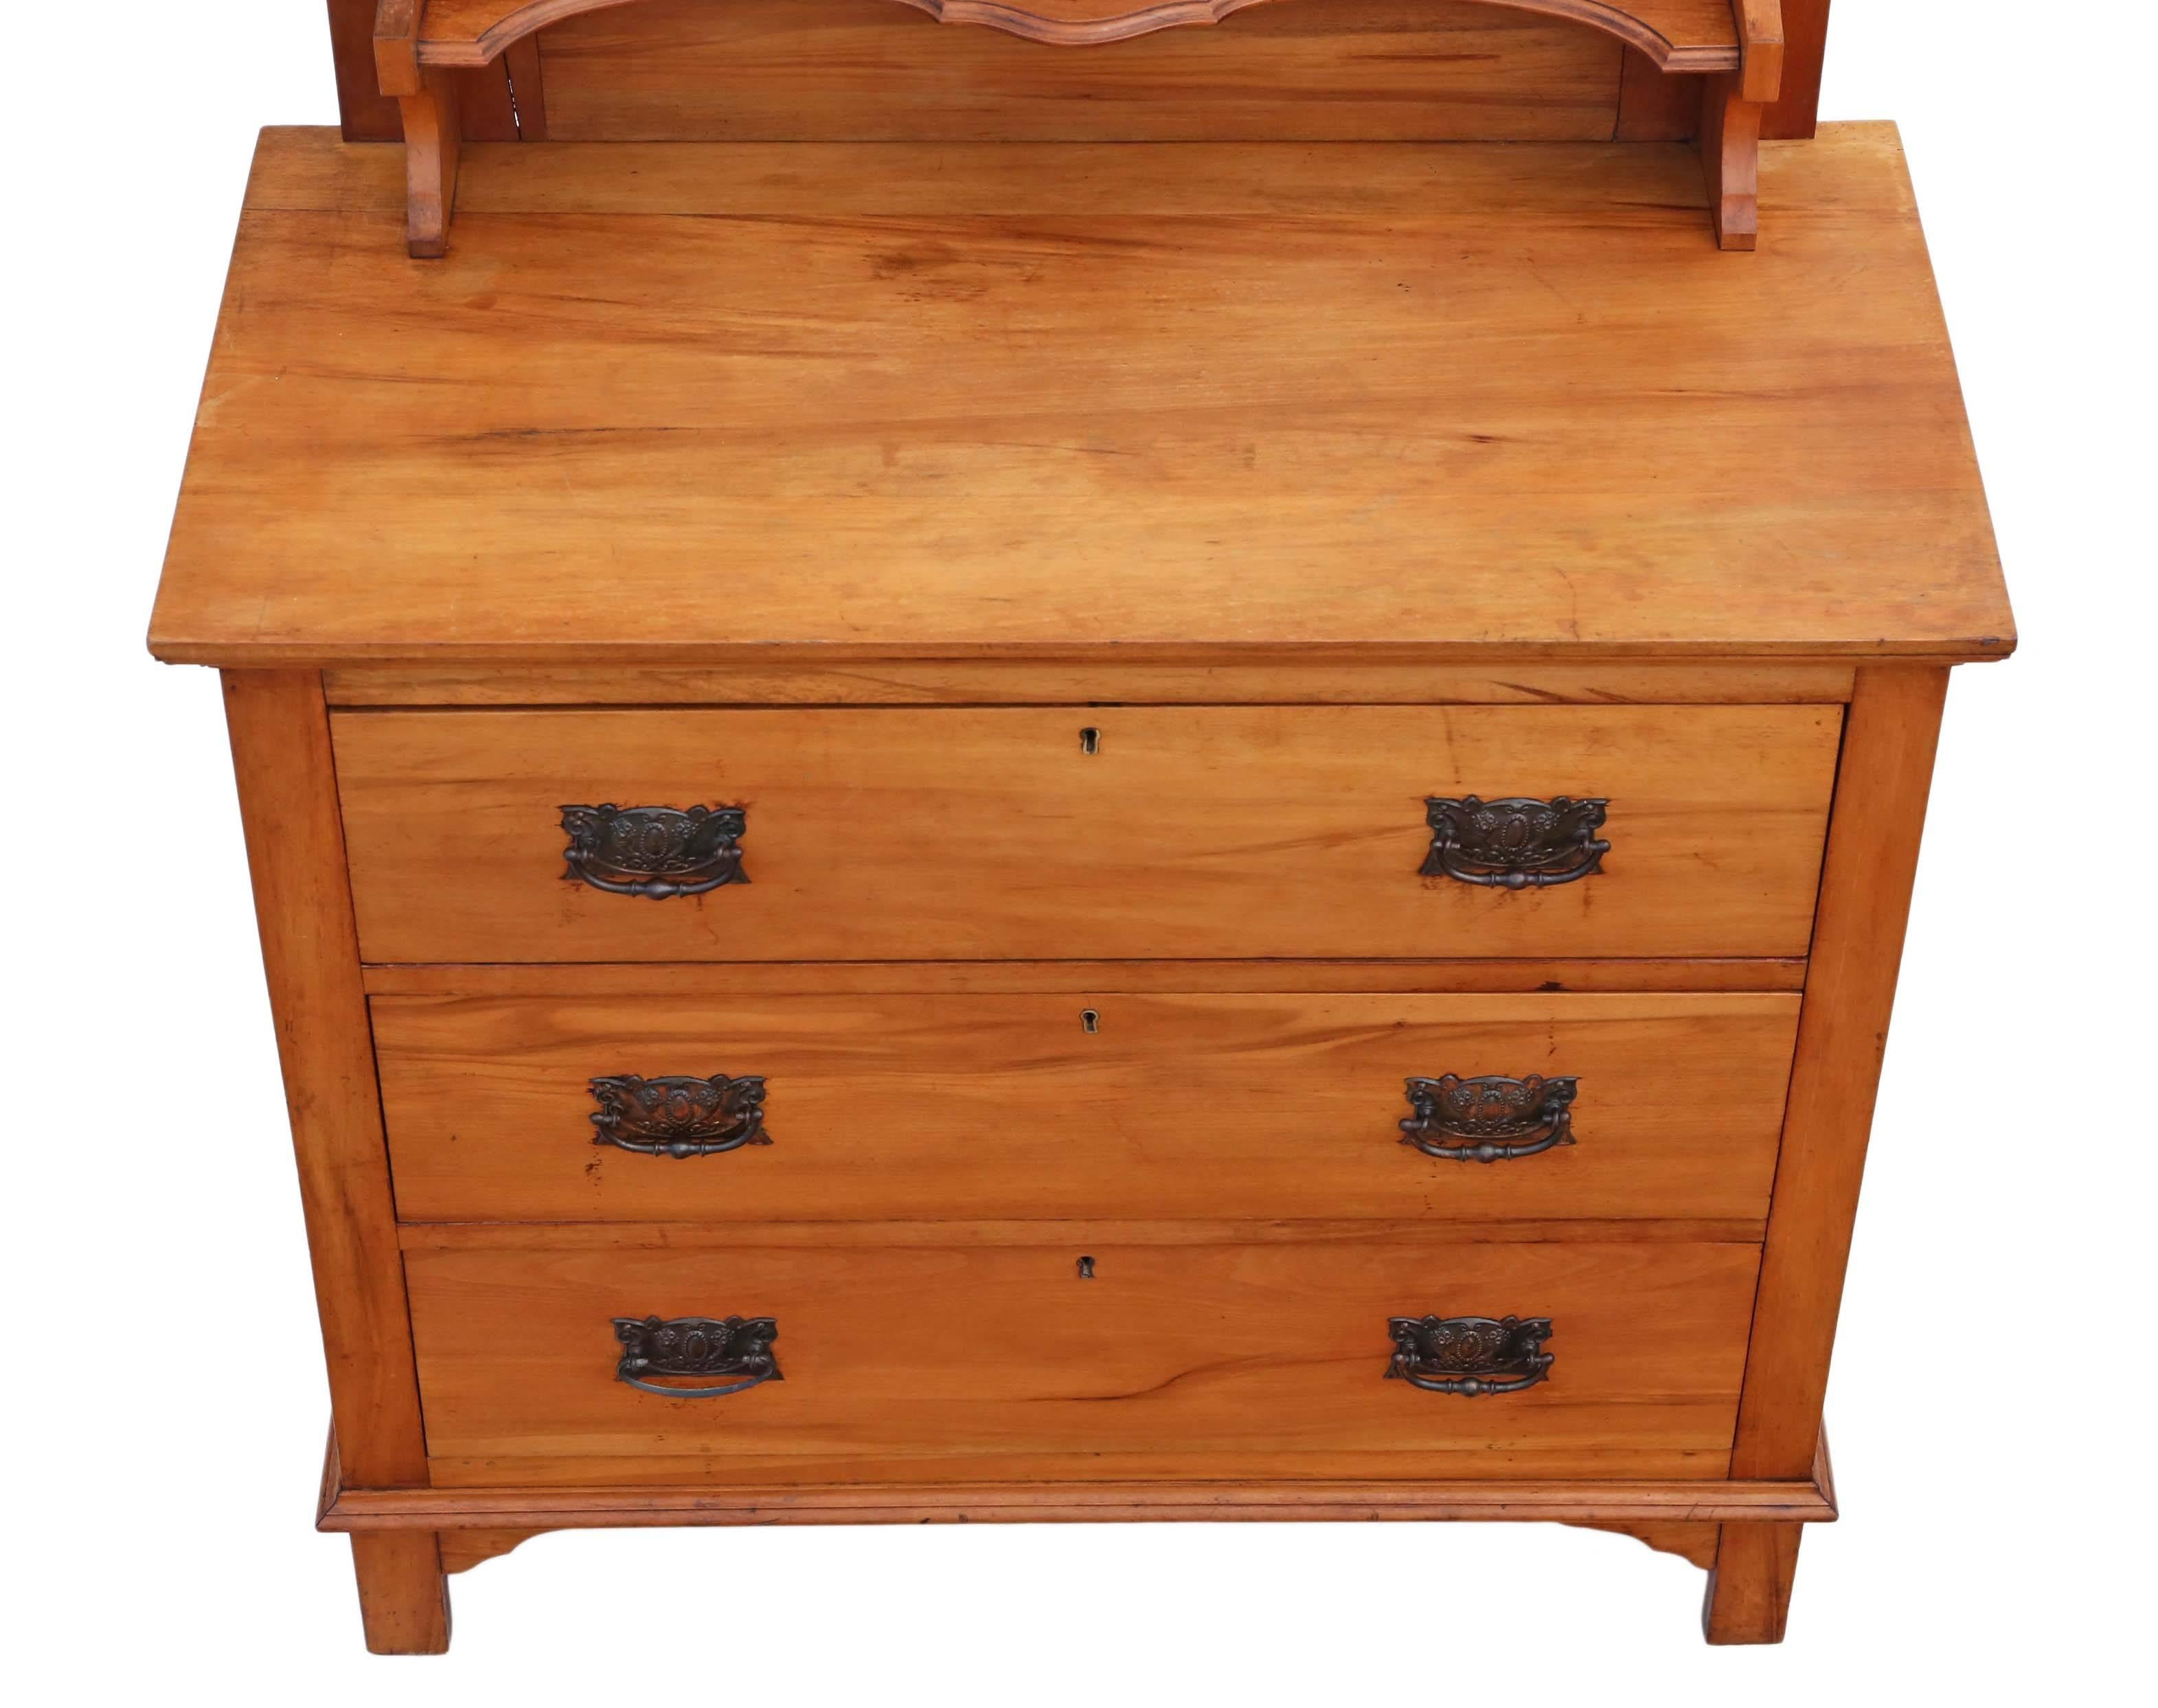 Antique Art Nouveau circa 1910 satinwood dressing table or chest of drawers.

This is a lovely item, that is full of age, charm and character.

Solid with no loose joints.

The drawers slide freely.

An attractive piece, whose bevel edge